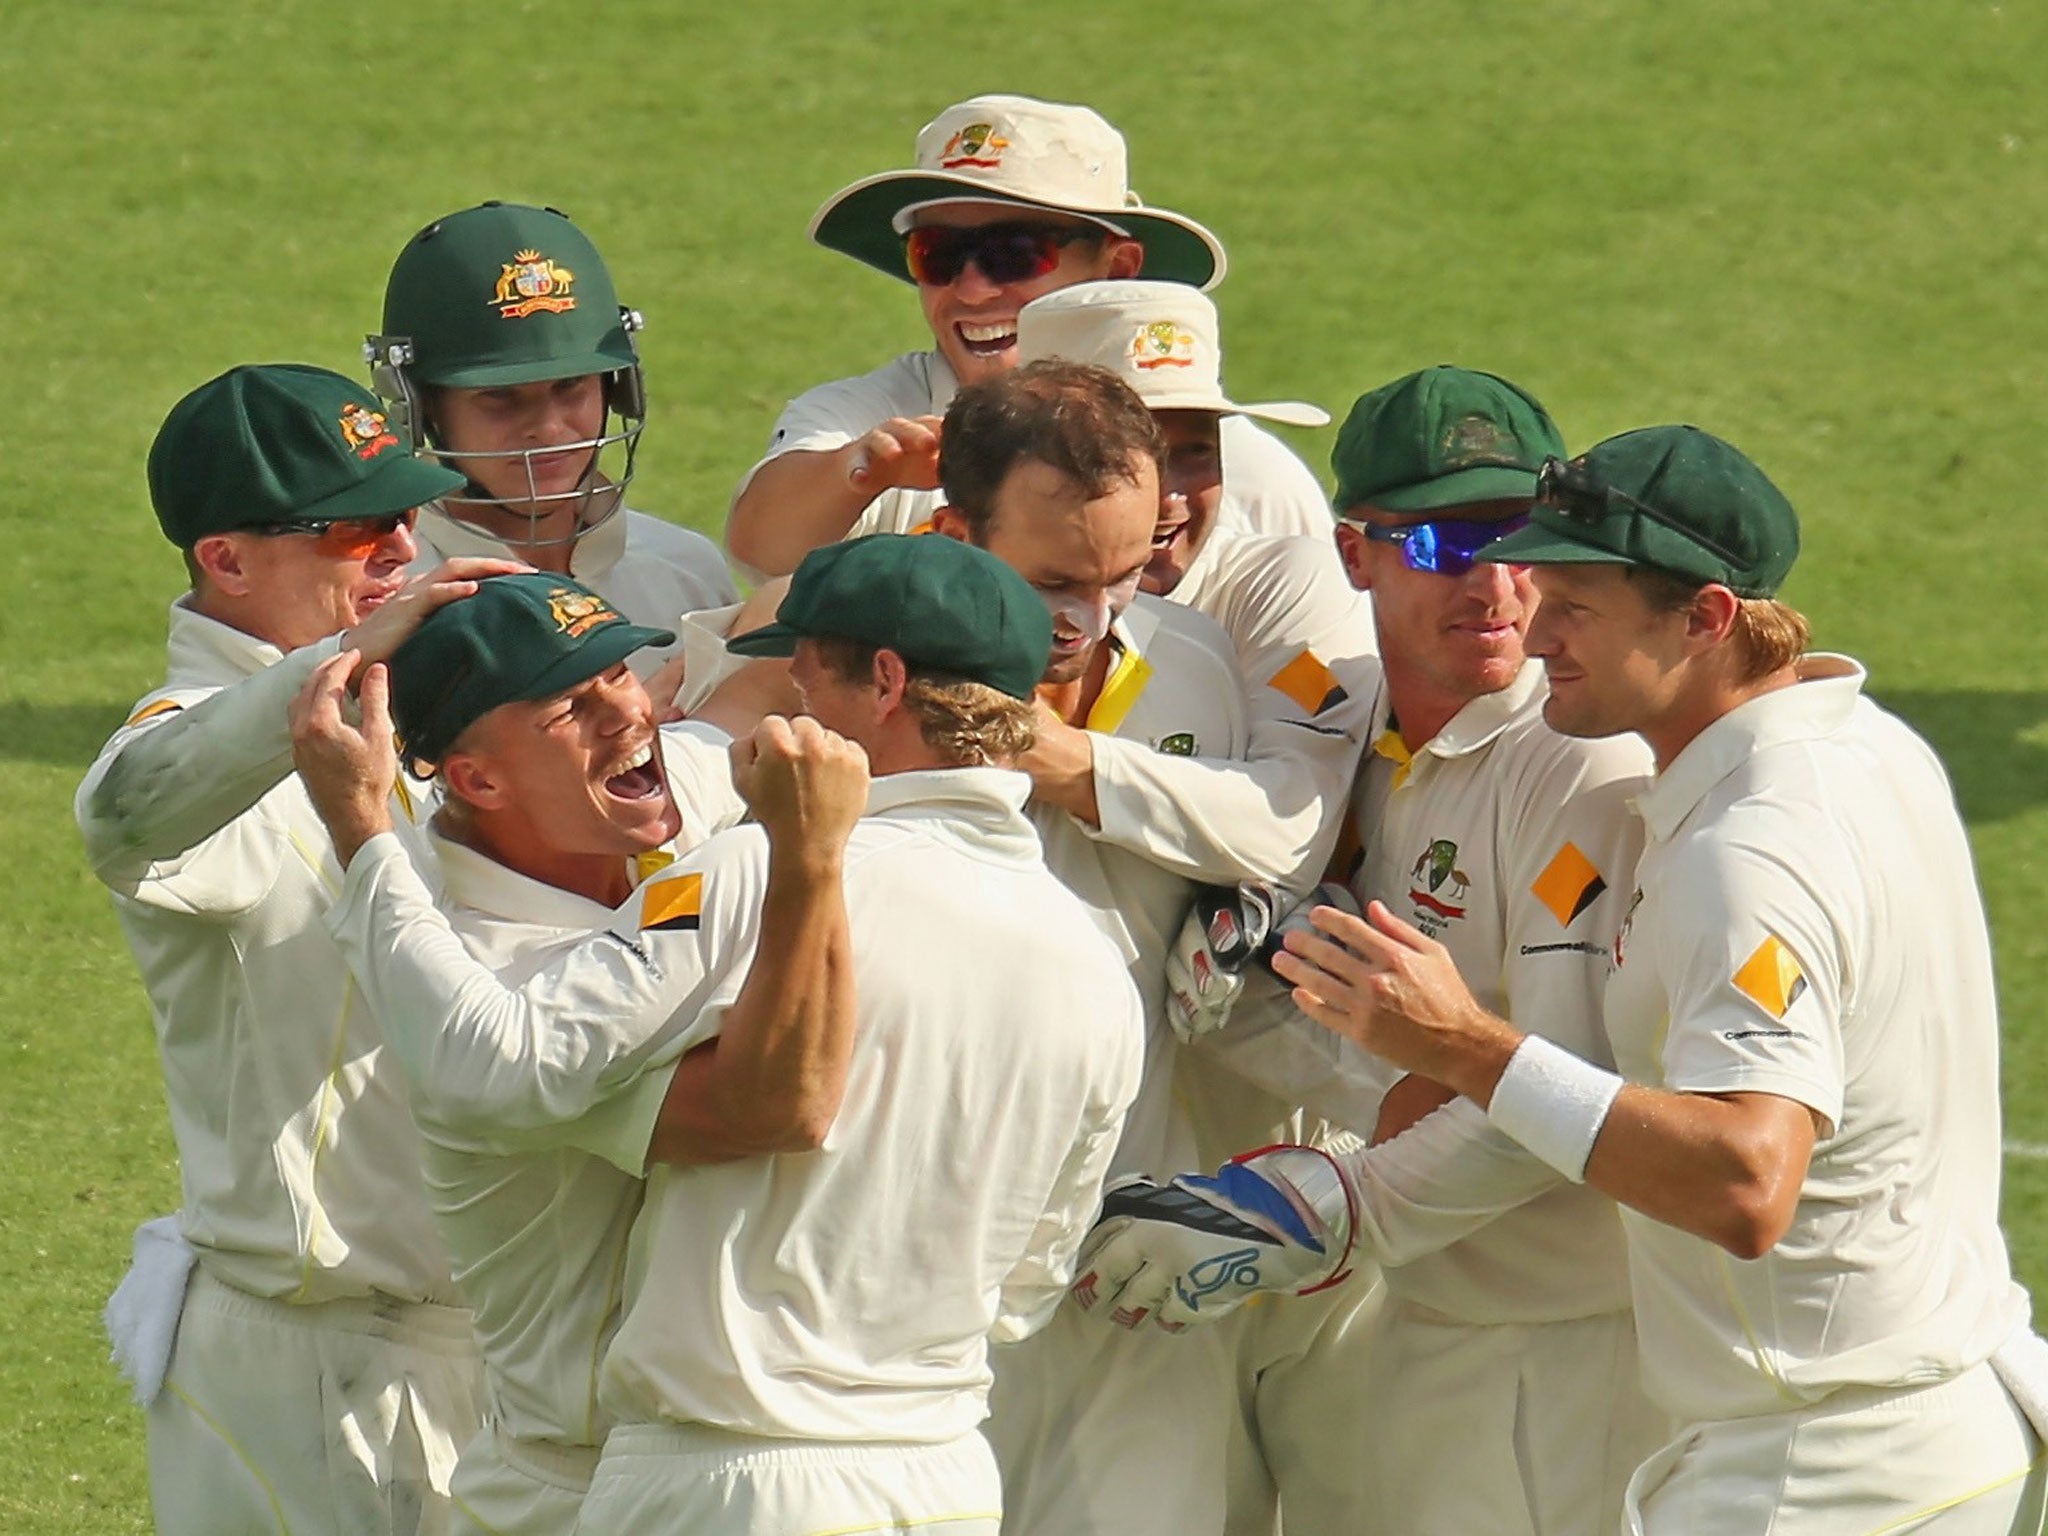 The Australian players celebrate another wicket on their way to victory over England